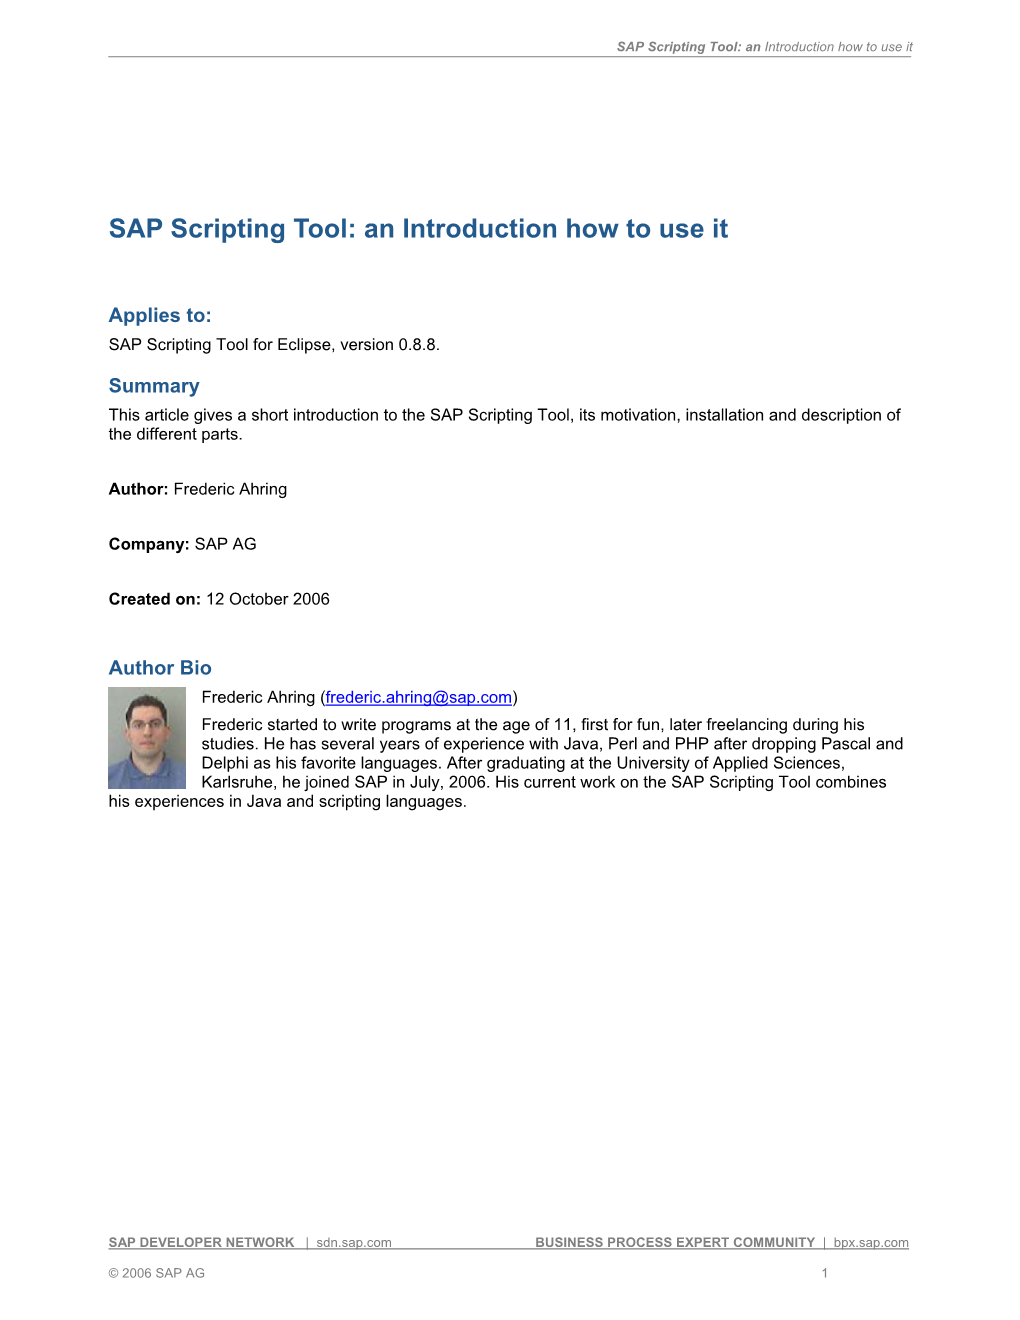 SAP Scripting Tool: an Introduction How to Use It